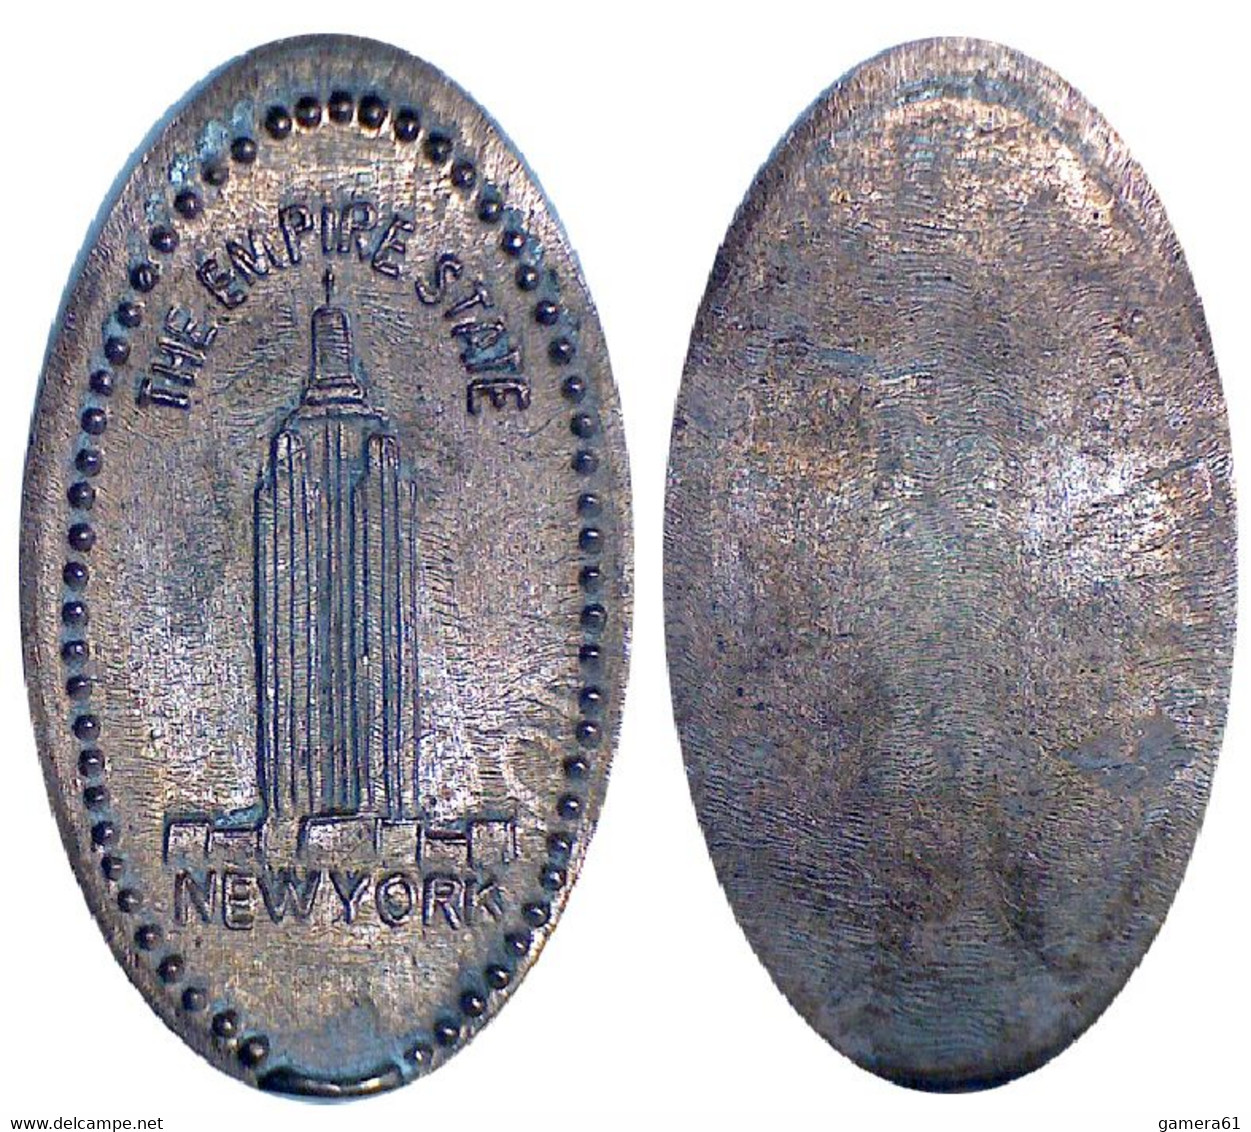 04533 GETTONE TOKEN JETON ELONGATED PENNY THE EMPIRE STATE NEW YORK - Souvenir-Medaille (elongated Coins)